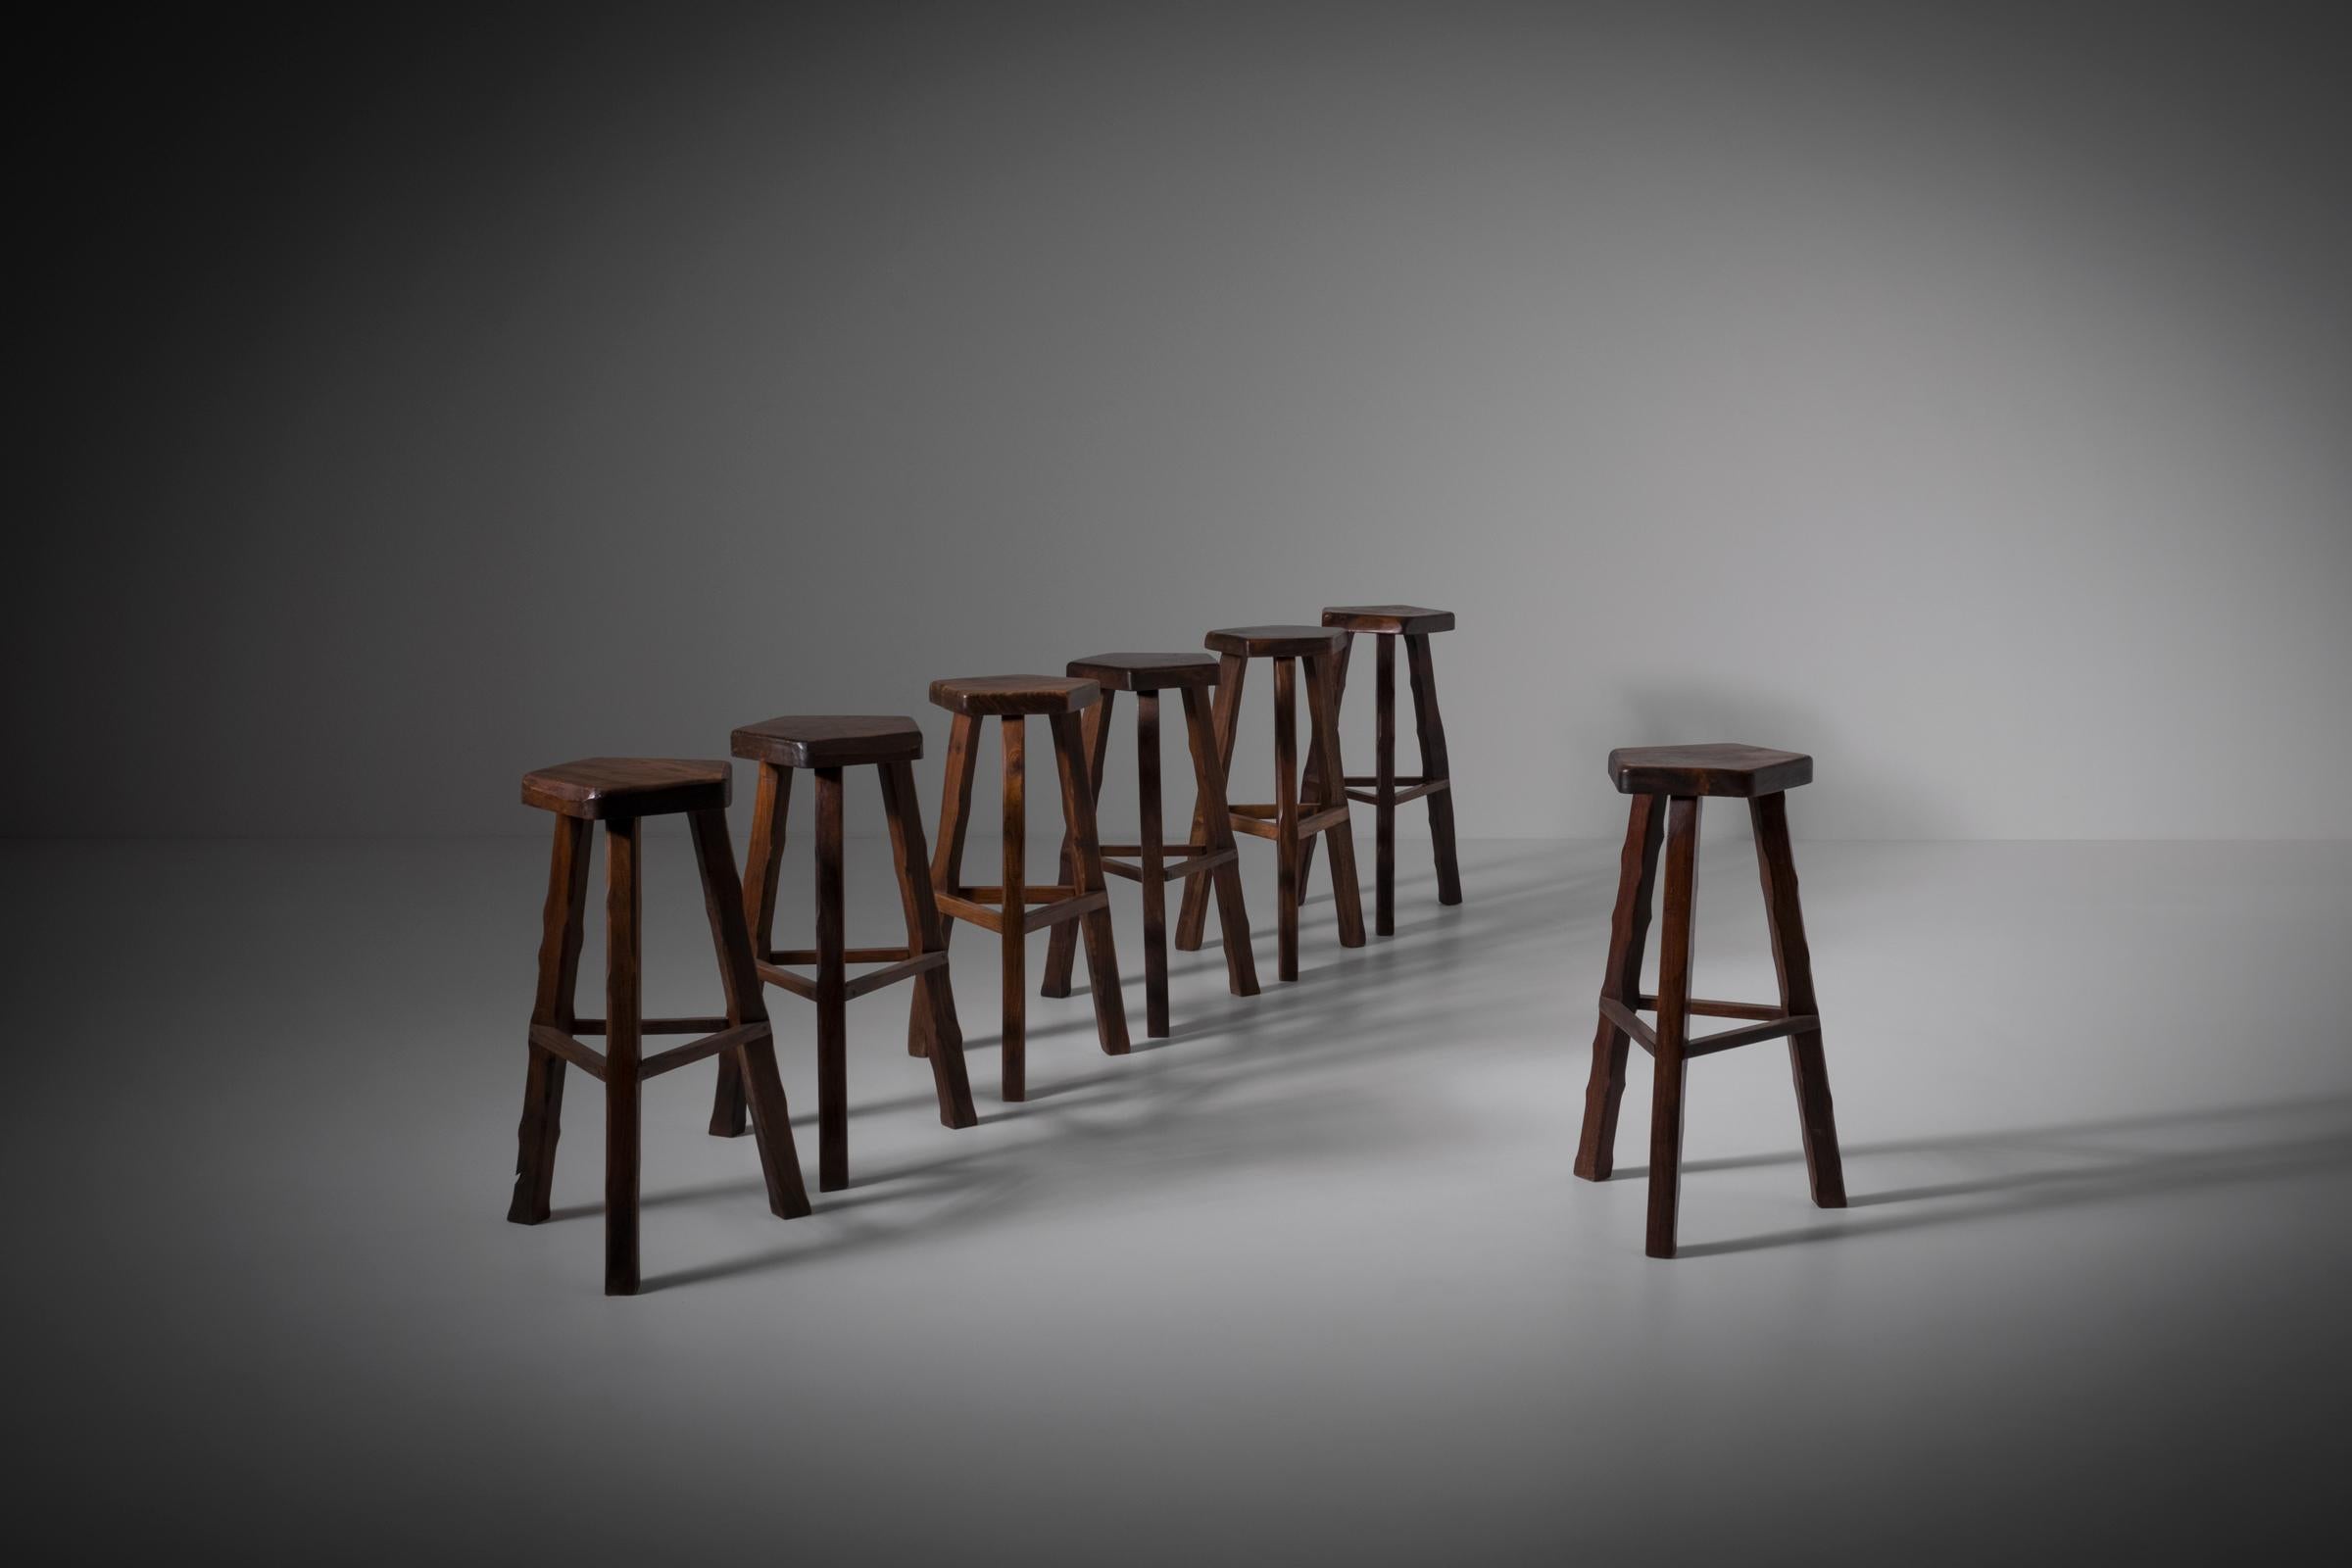 Set of seven sculptural bar stools, France 1960s. These bar stools are often attributed to Olavi Hänninen but are actually a French production of the 60s. The stools are constructed out of dark stained Elm wood with nice warm tones. Every single